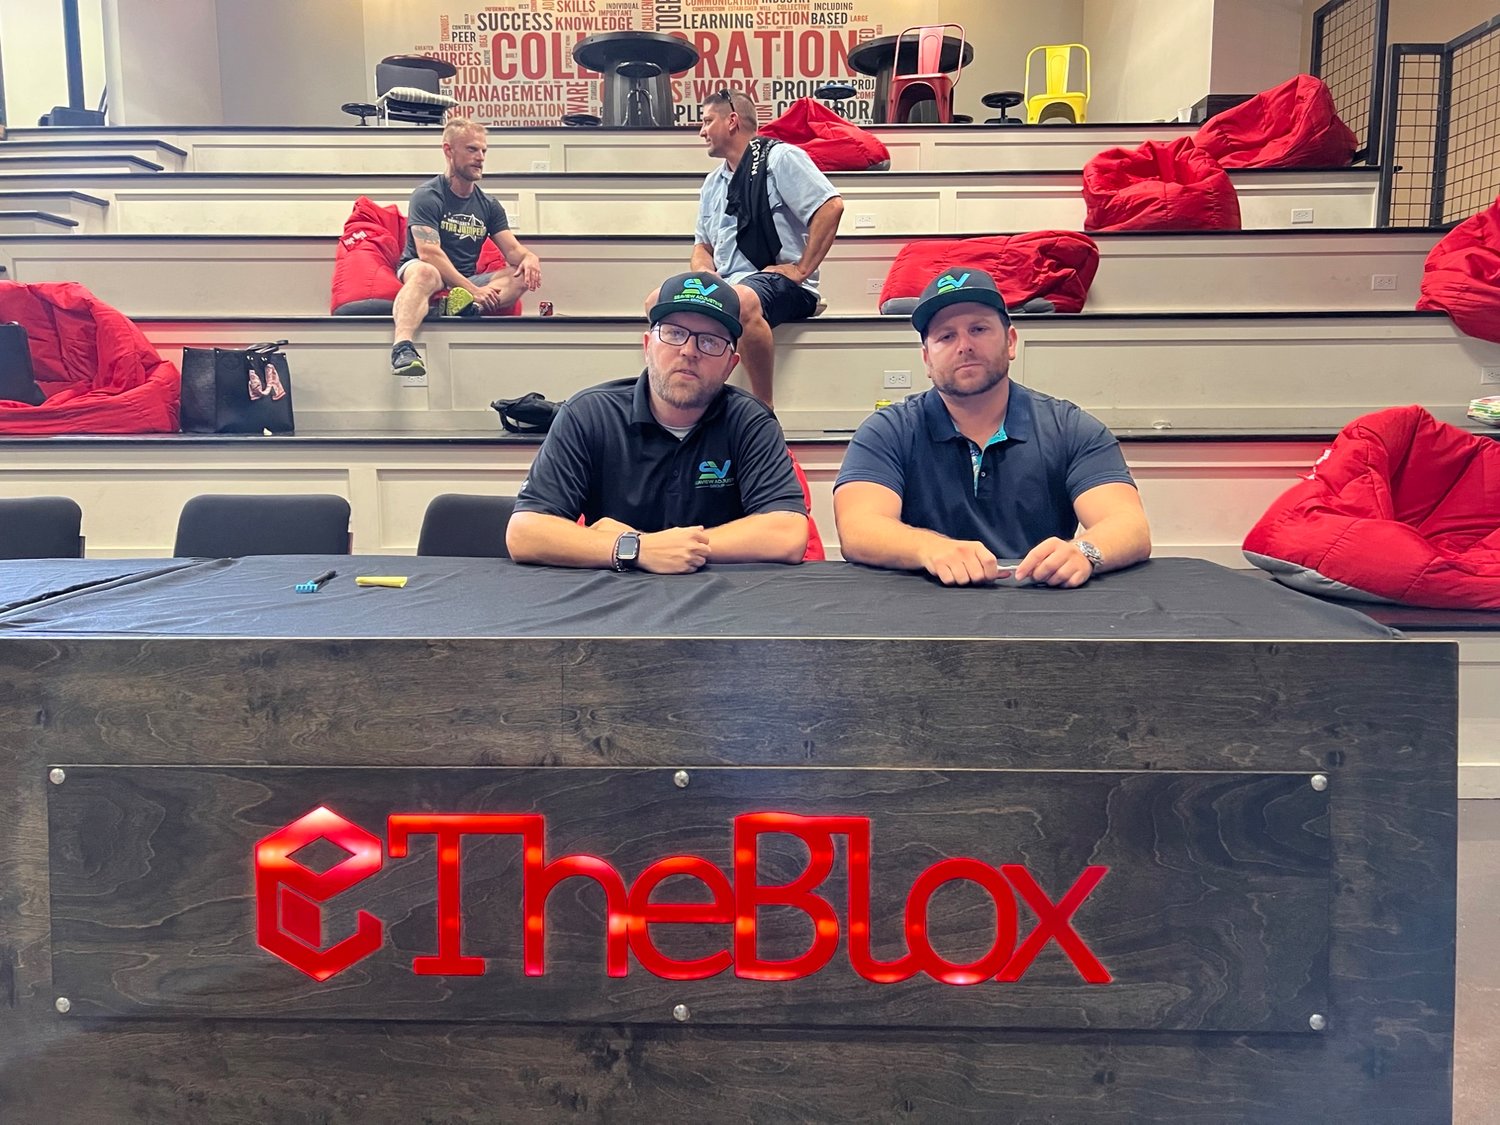 Founders of Seaview Adjusting Group Inc. Eric Stroud and Garrett Guttenberg can be seen on the Blox App competing.